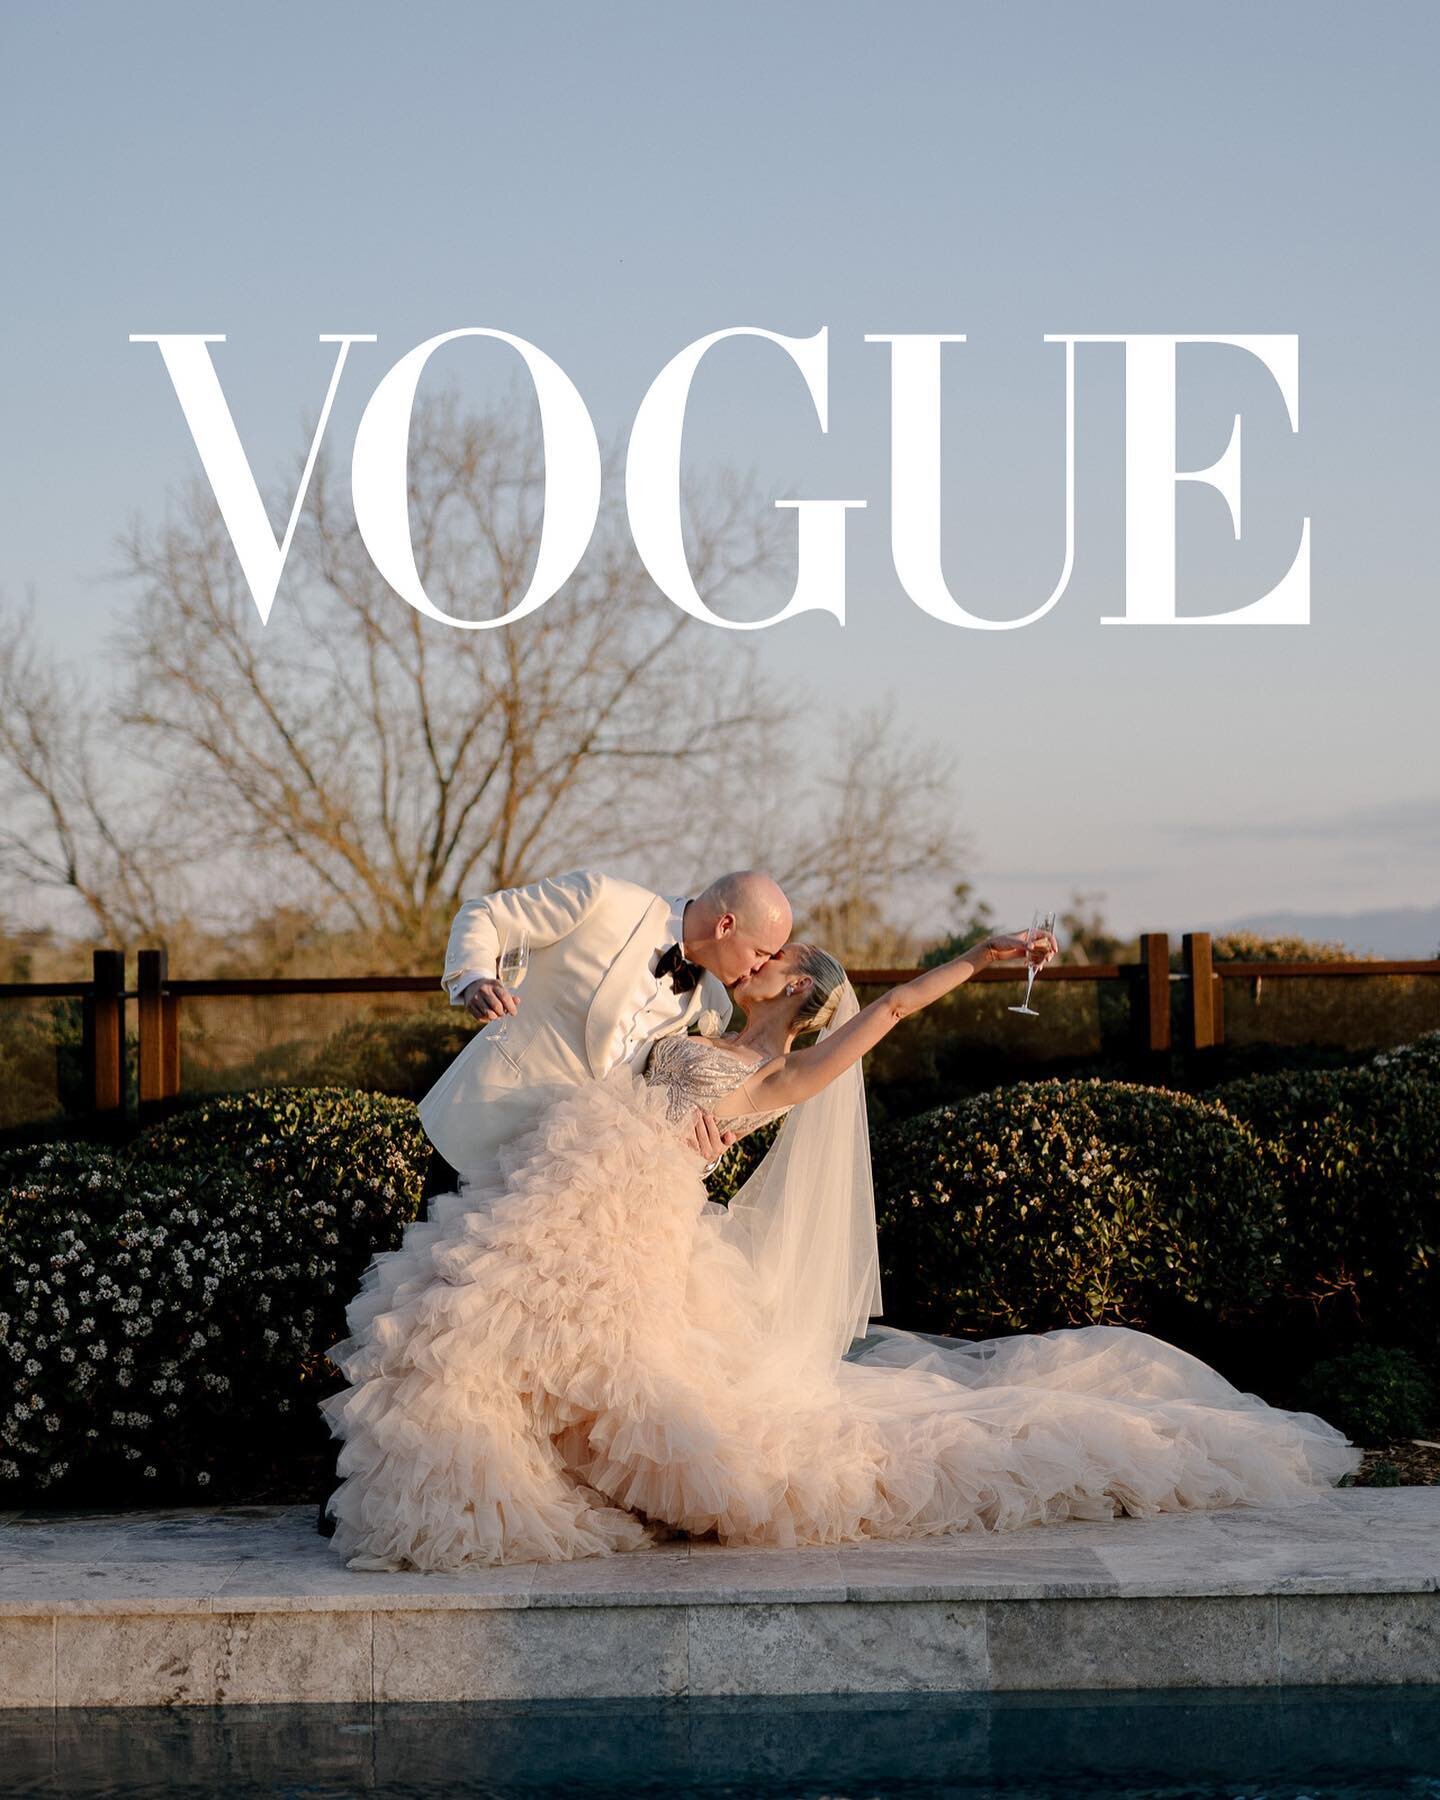 I am absolutely over the moon to be featured and recommended in the February issue of British Vogue!

Thank you to Sarah and Tom for putting your trust in me to photograph such a spectacular wedding. Can we PLEASE do it all again?!

@britishvogue @vo